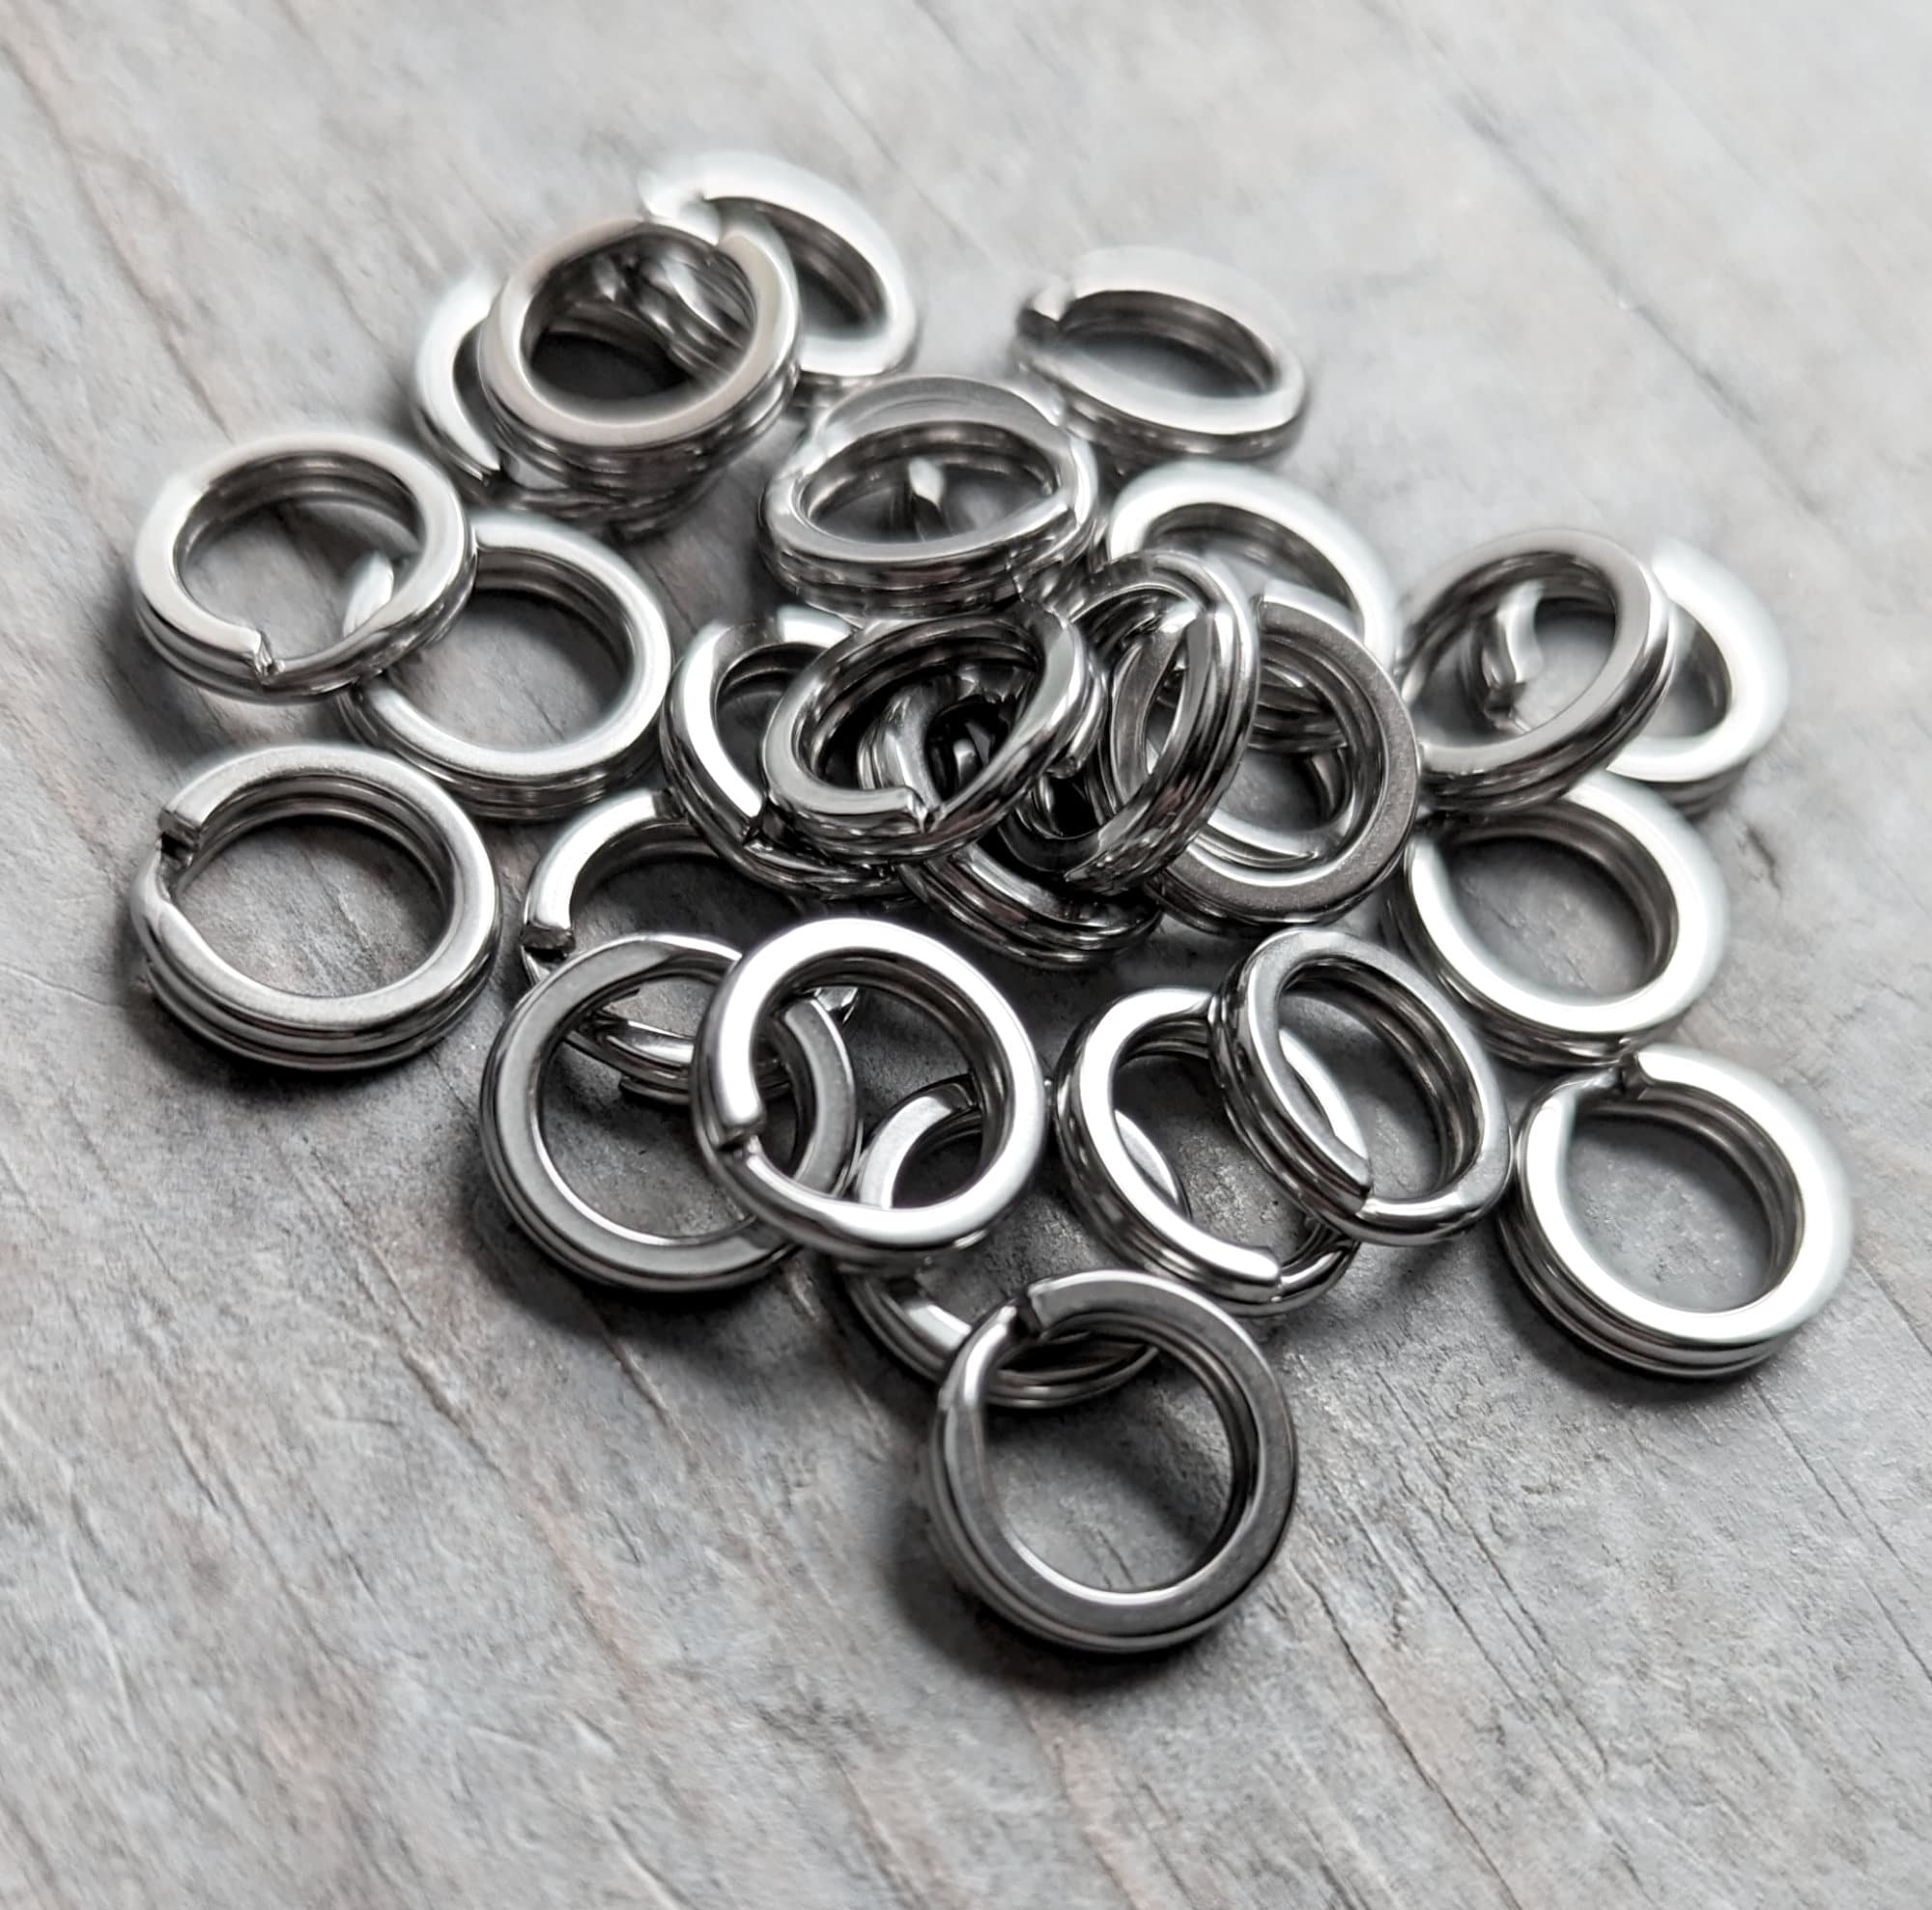 CH8 Titanium Key Rings Split Rings, Titanium Keychain, Non Magnetic Small  Keyrings, Jump Rings for Necklaces - 18psc Flat Ring (Polished) 